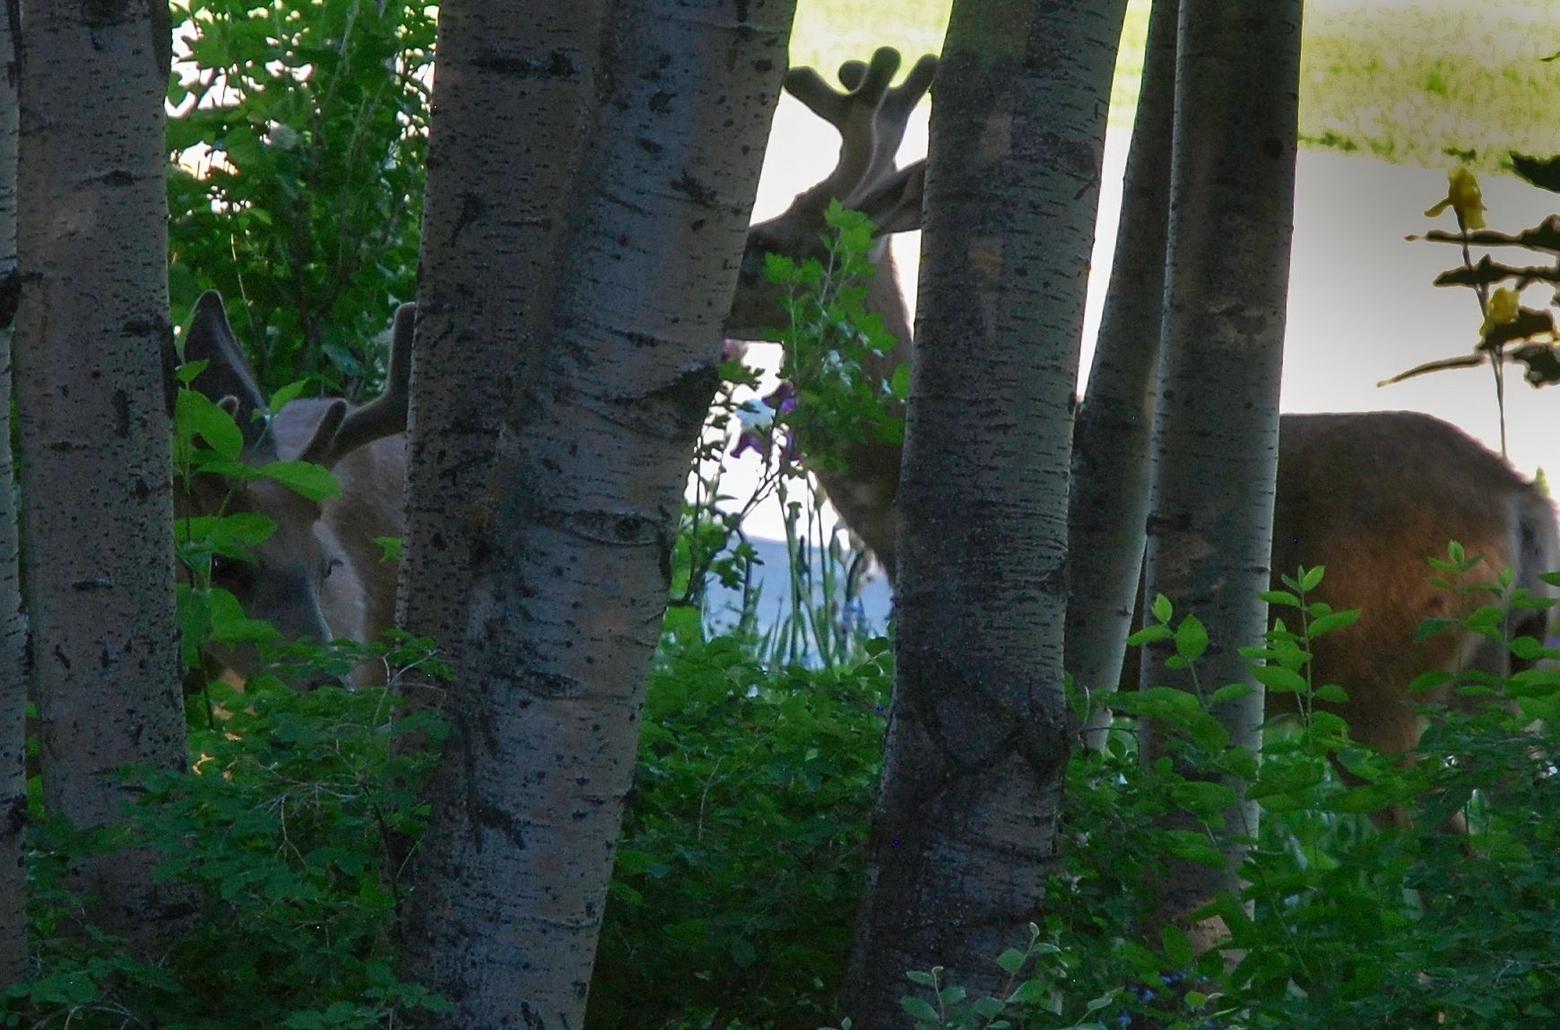 Even when confronting unspeakable loss, Marsh's forays into the wild country of Greater Yellowstone always open her eyes to promise, hope, discovery and a spirit of Nature he finds comforting. Photo of mule deer courtesy Susan Marsh